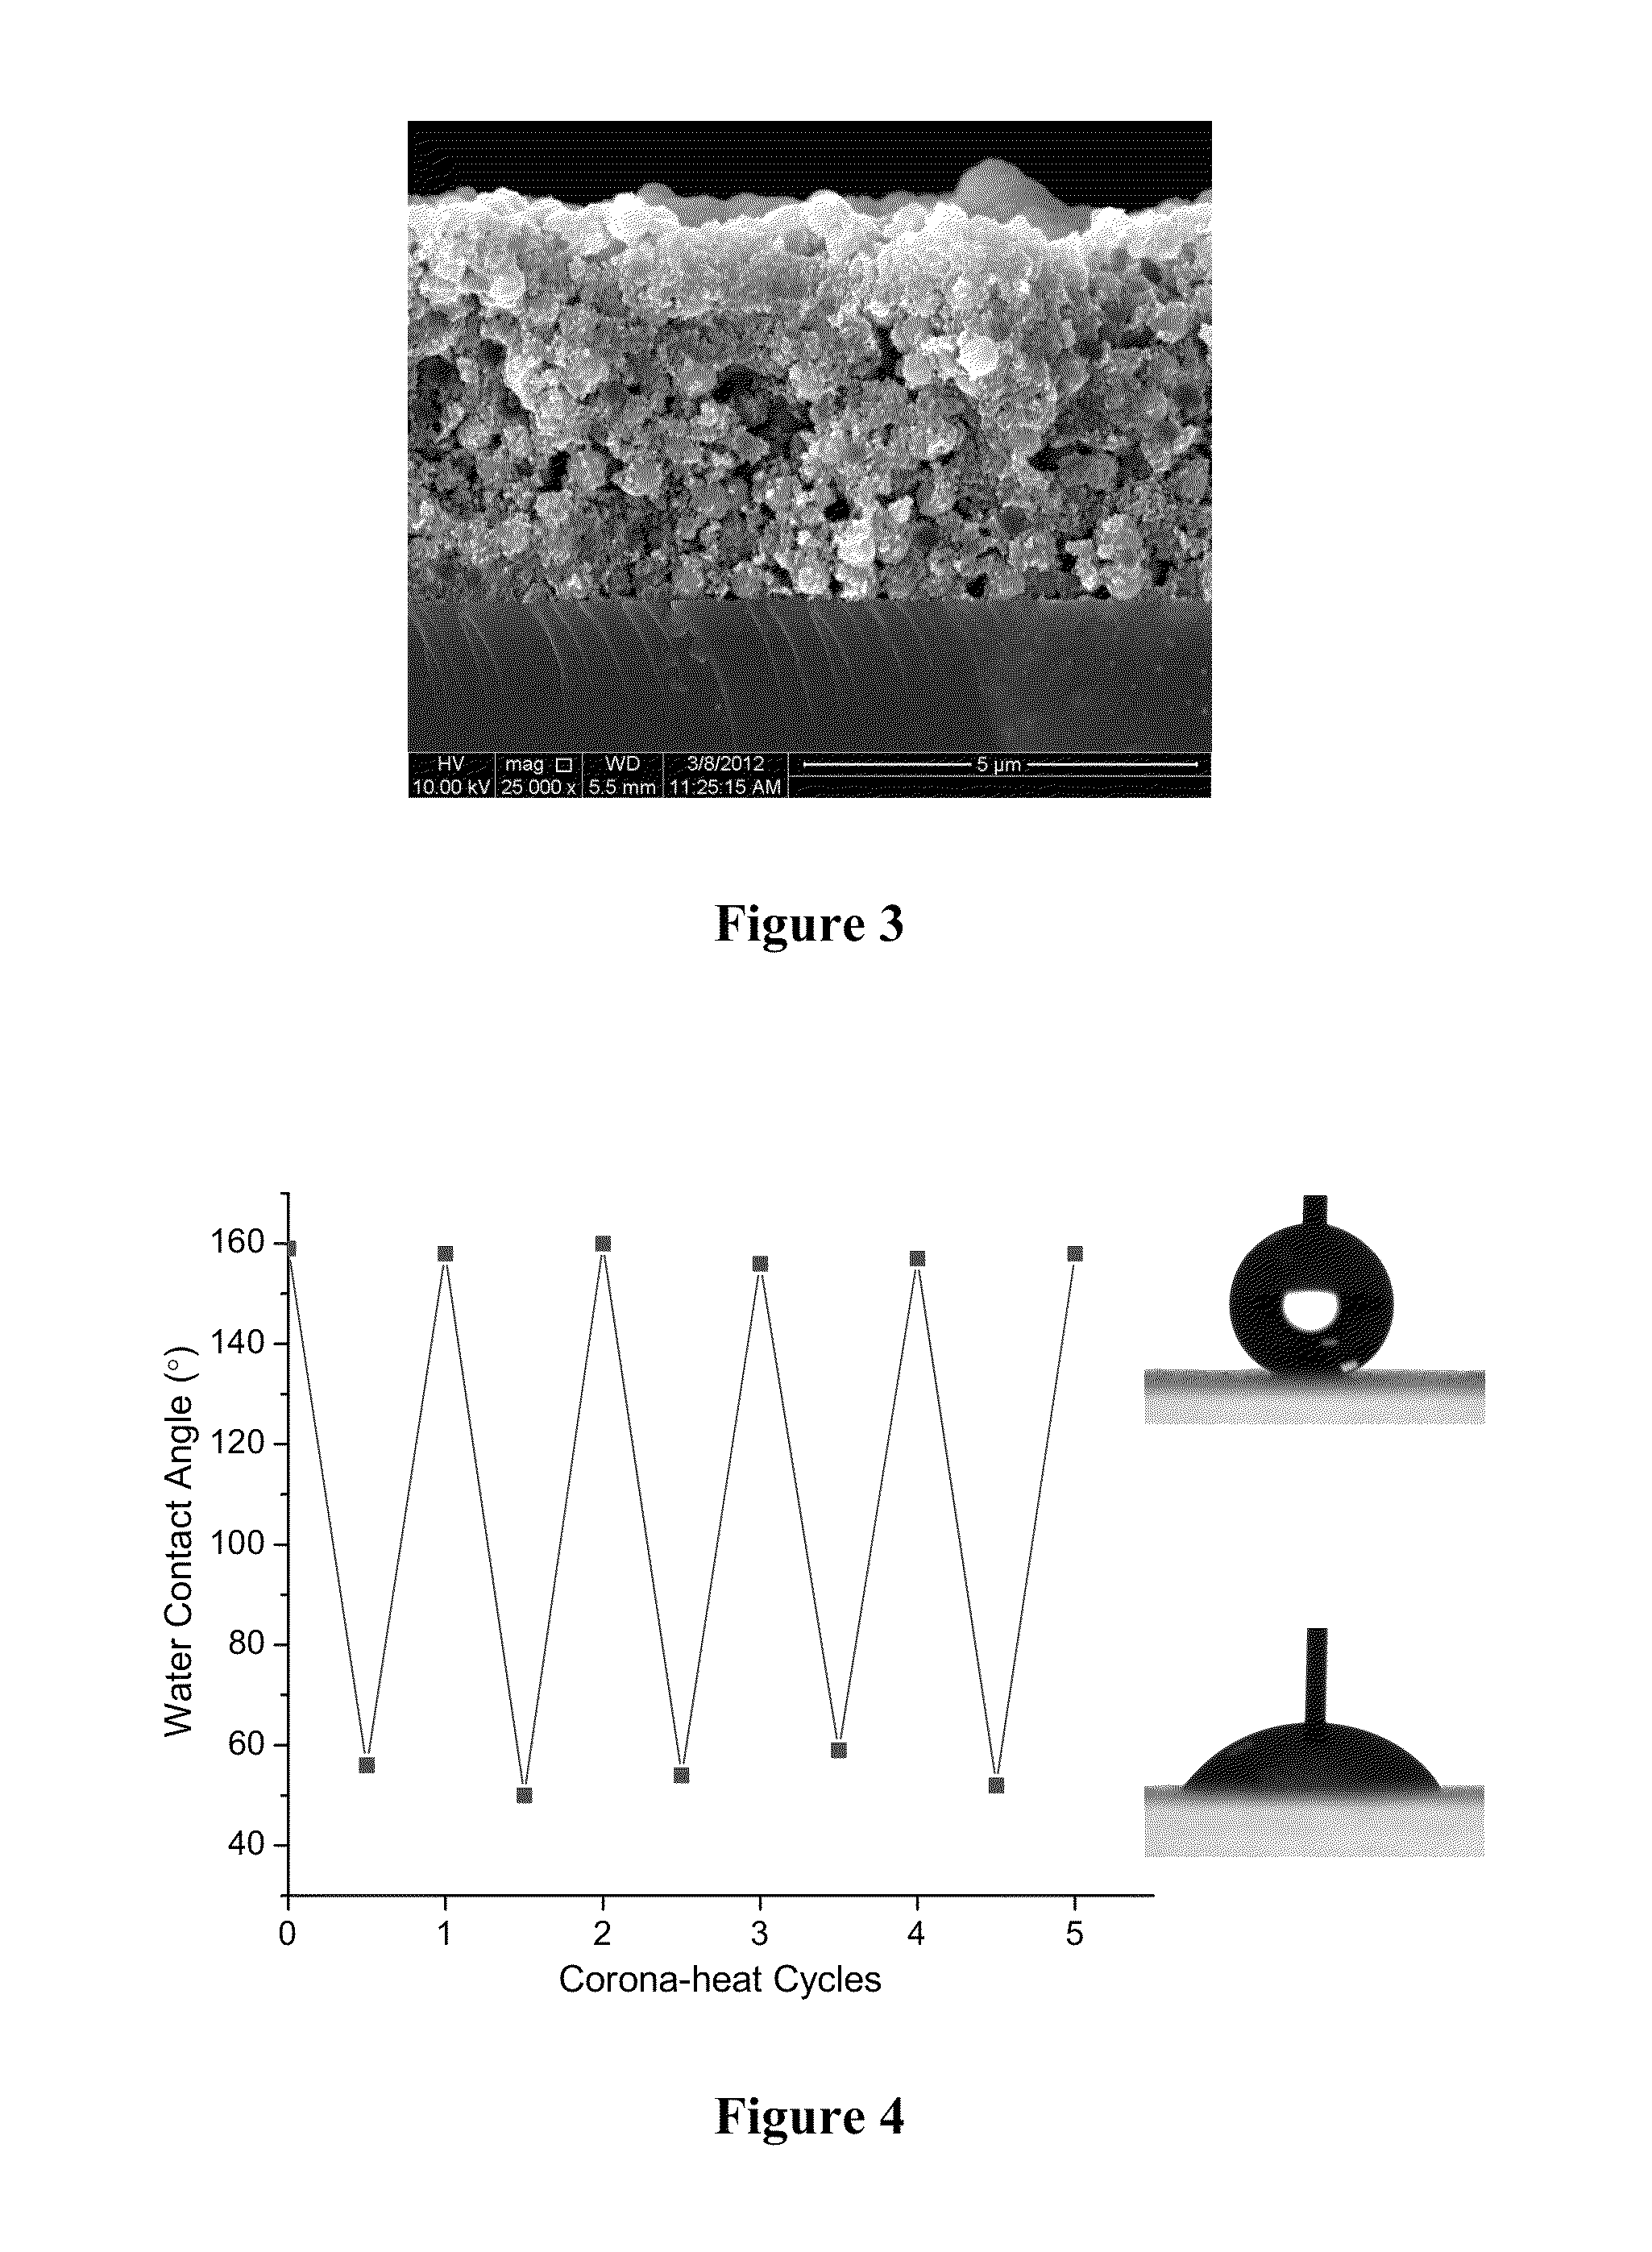 Self-healing superhydrophobic coating composition and method of preparation